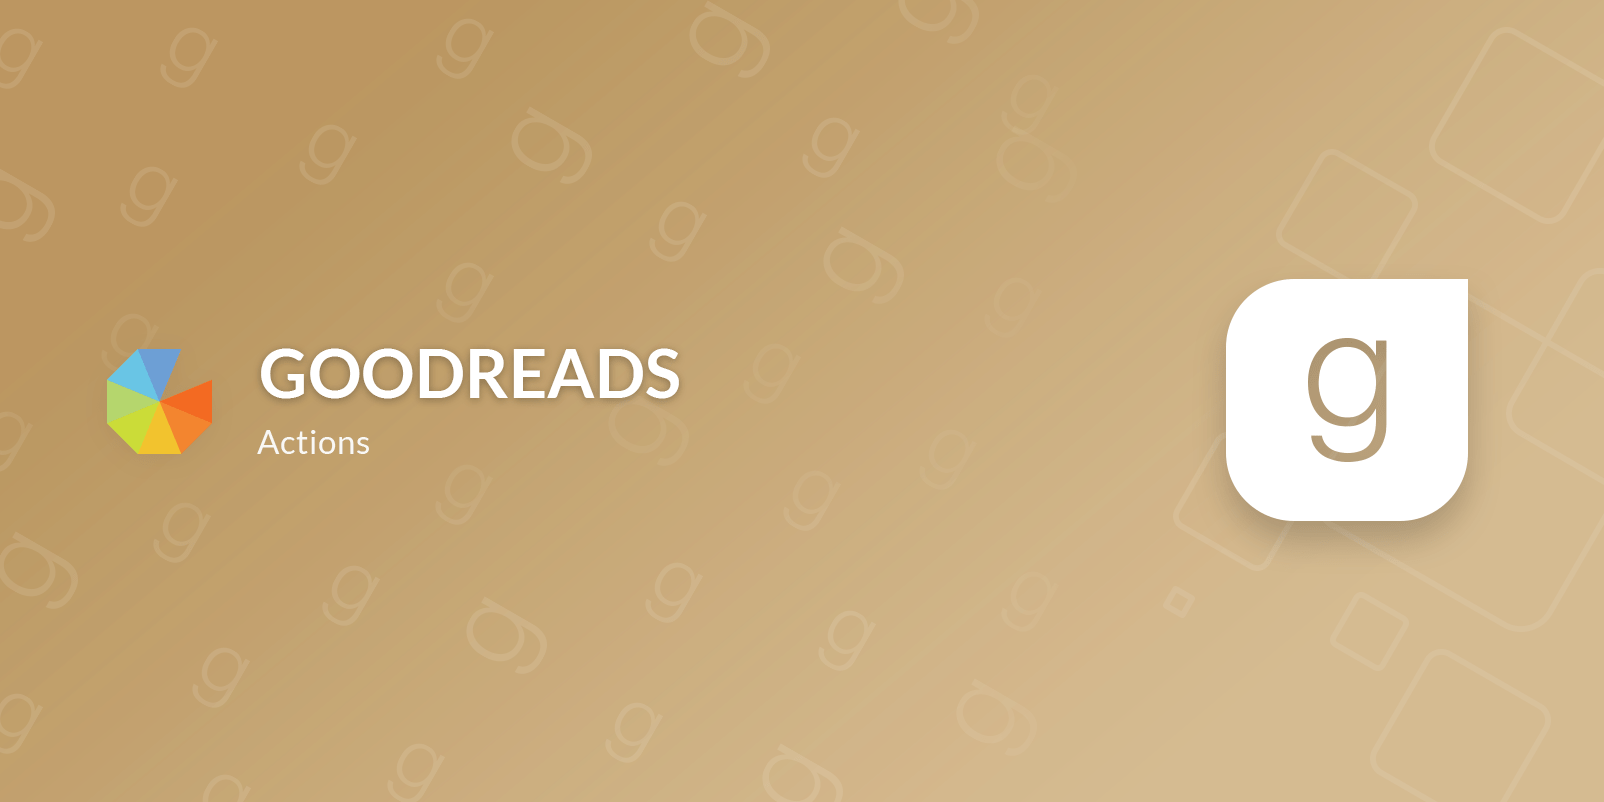 Goodreads Actions for Gleam